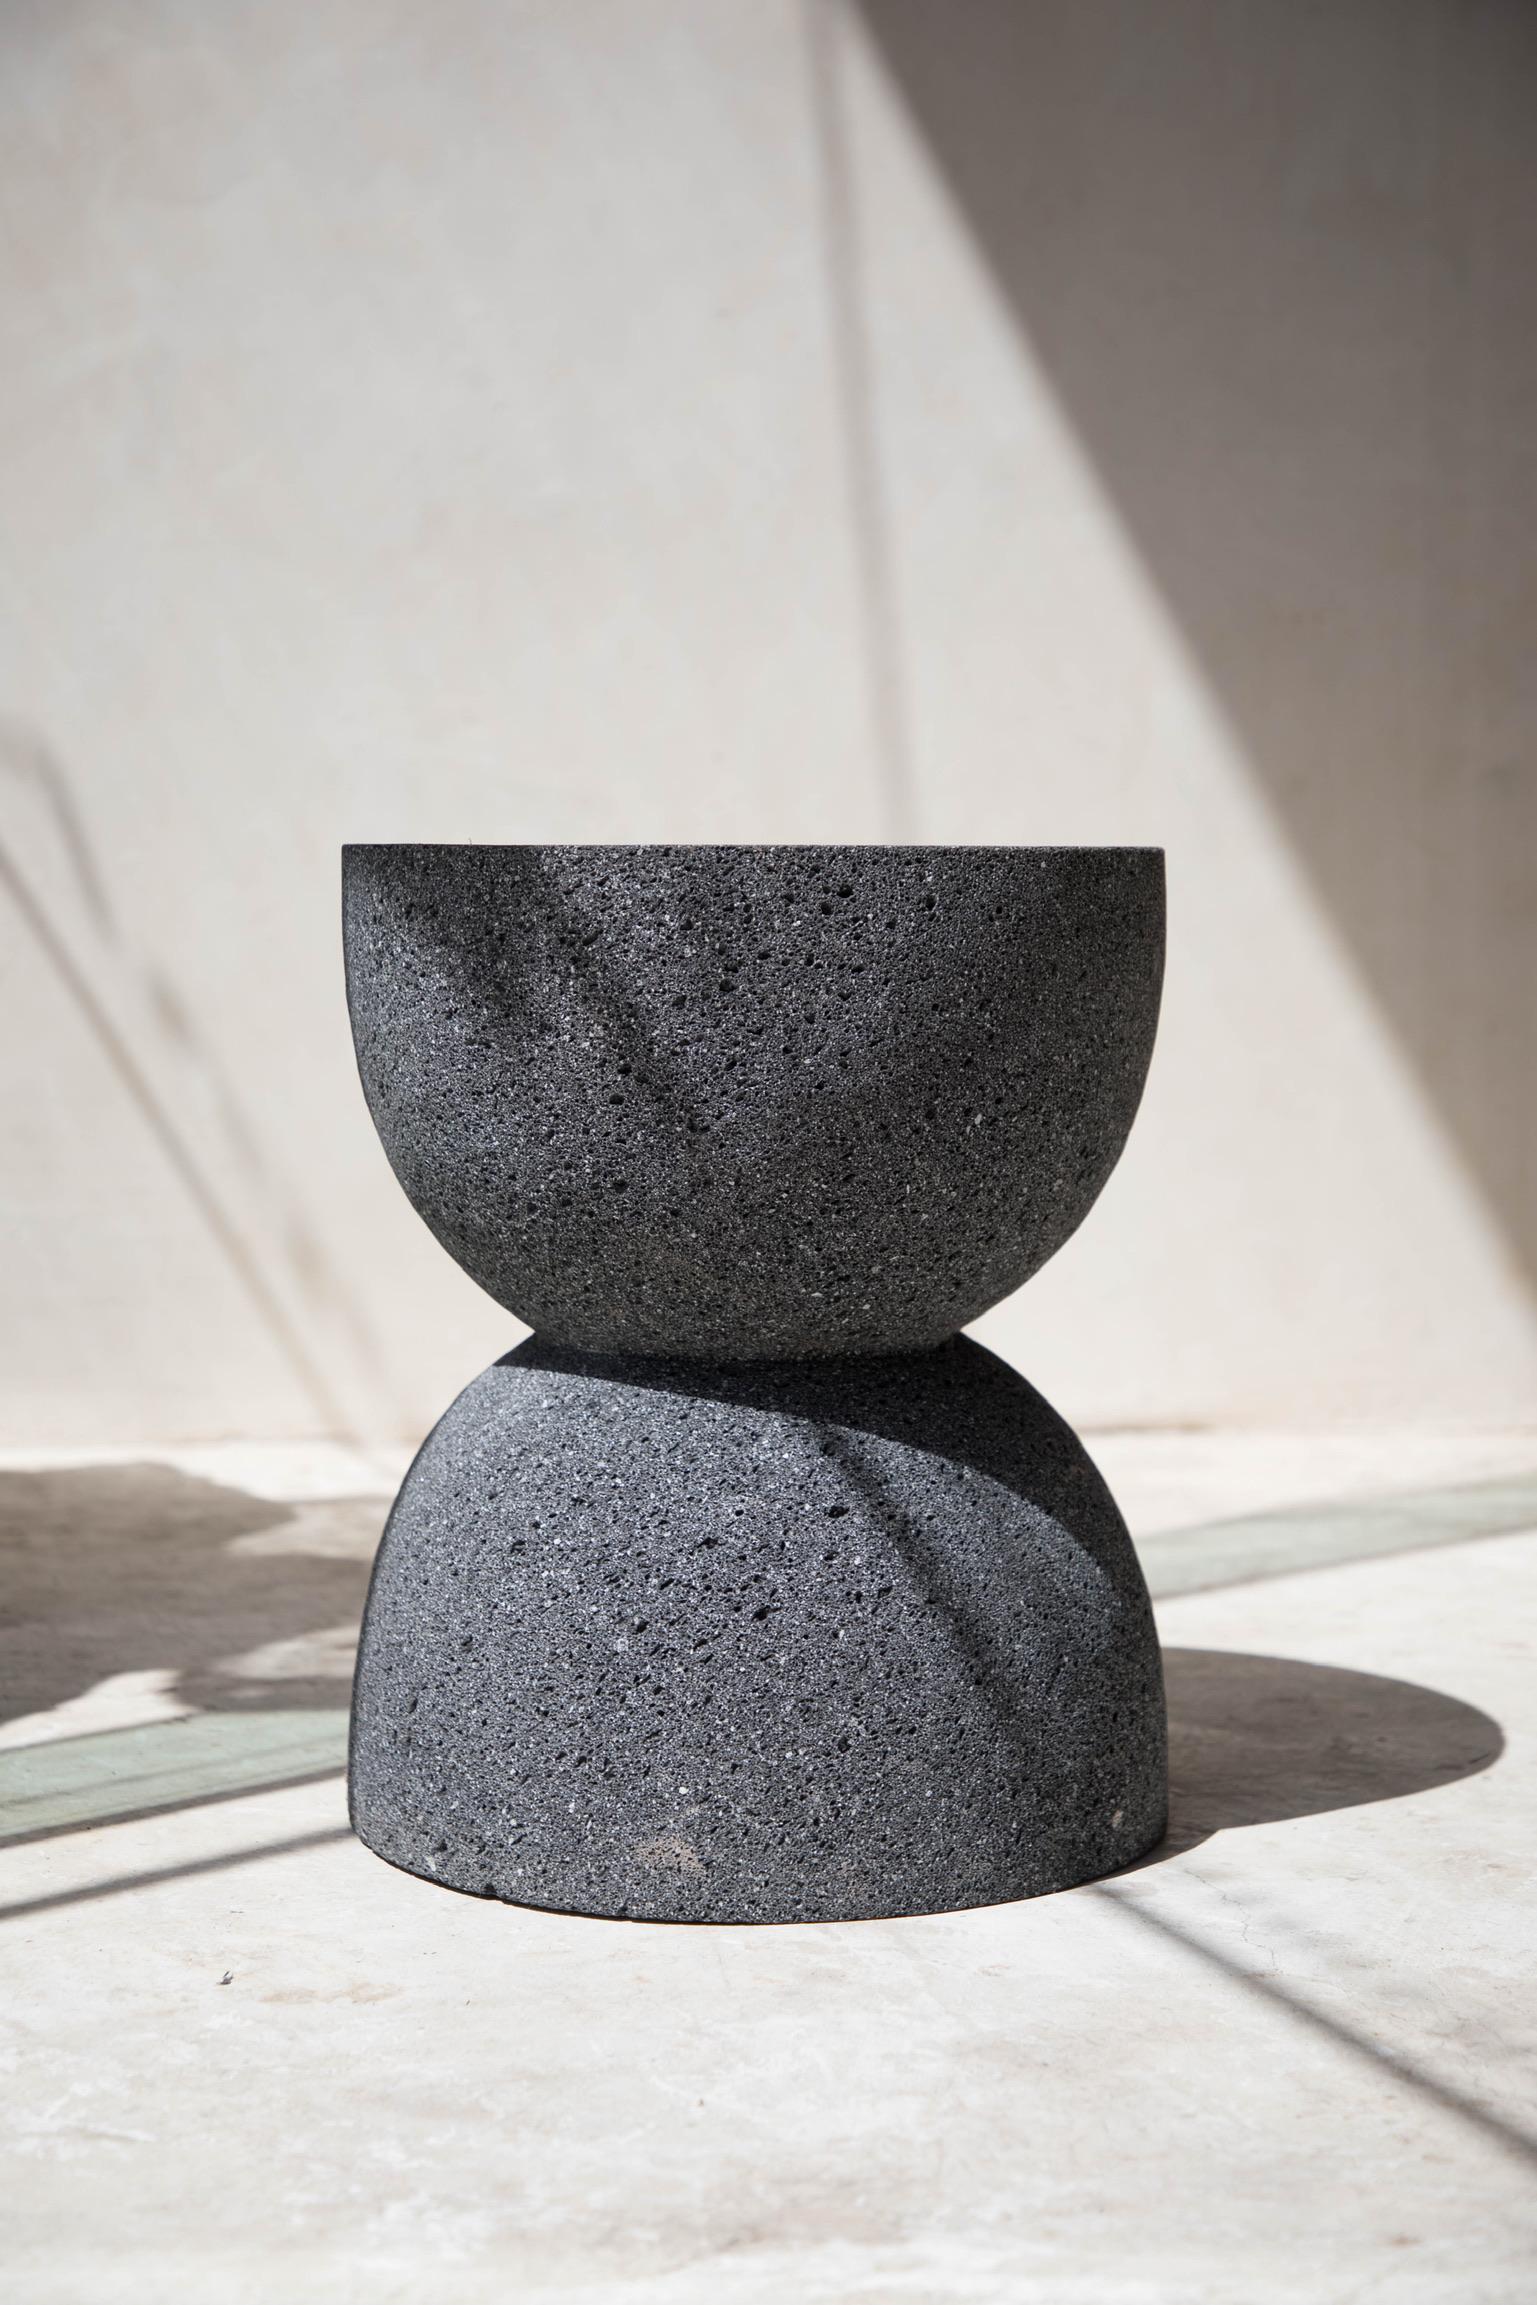 Stone totem 04 by Daniel Orozco
Material: Volcanic rock.
Dimensions: D 35 x H 45 cm

Volvanic rock Totem.

Daniel Orozco Estudio
We are an inclusive interior design estudio, who love to work with fabrics and natural textiles in makes our